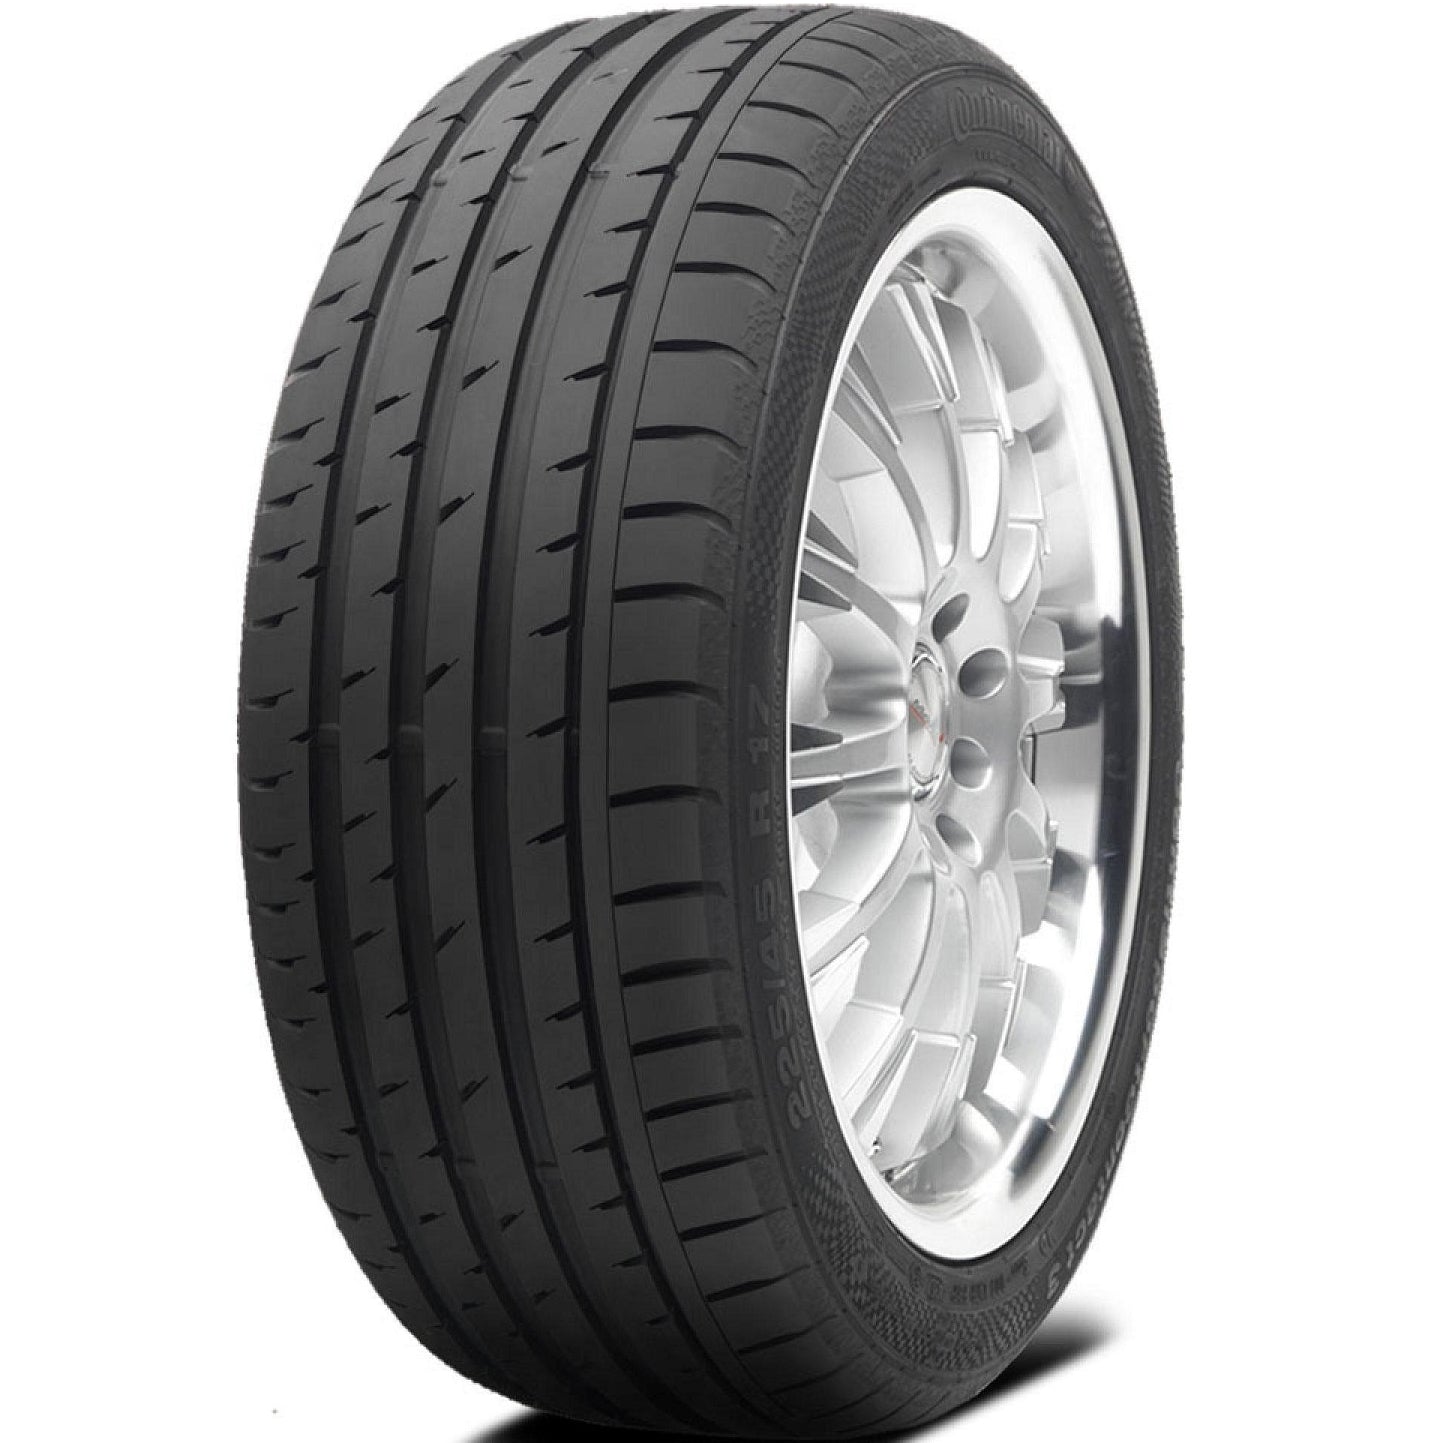 CONTINENTAL CONTISPORTCONTACT 3 255/55R18 (29X10R 18) Tires